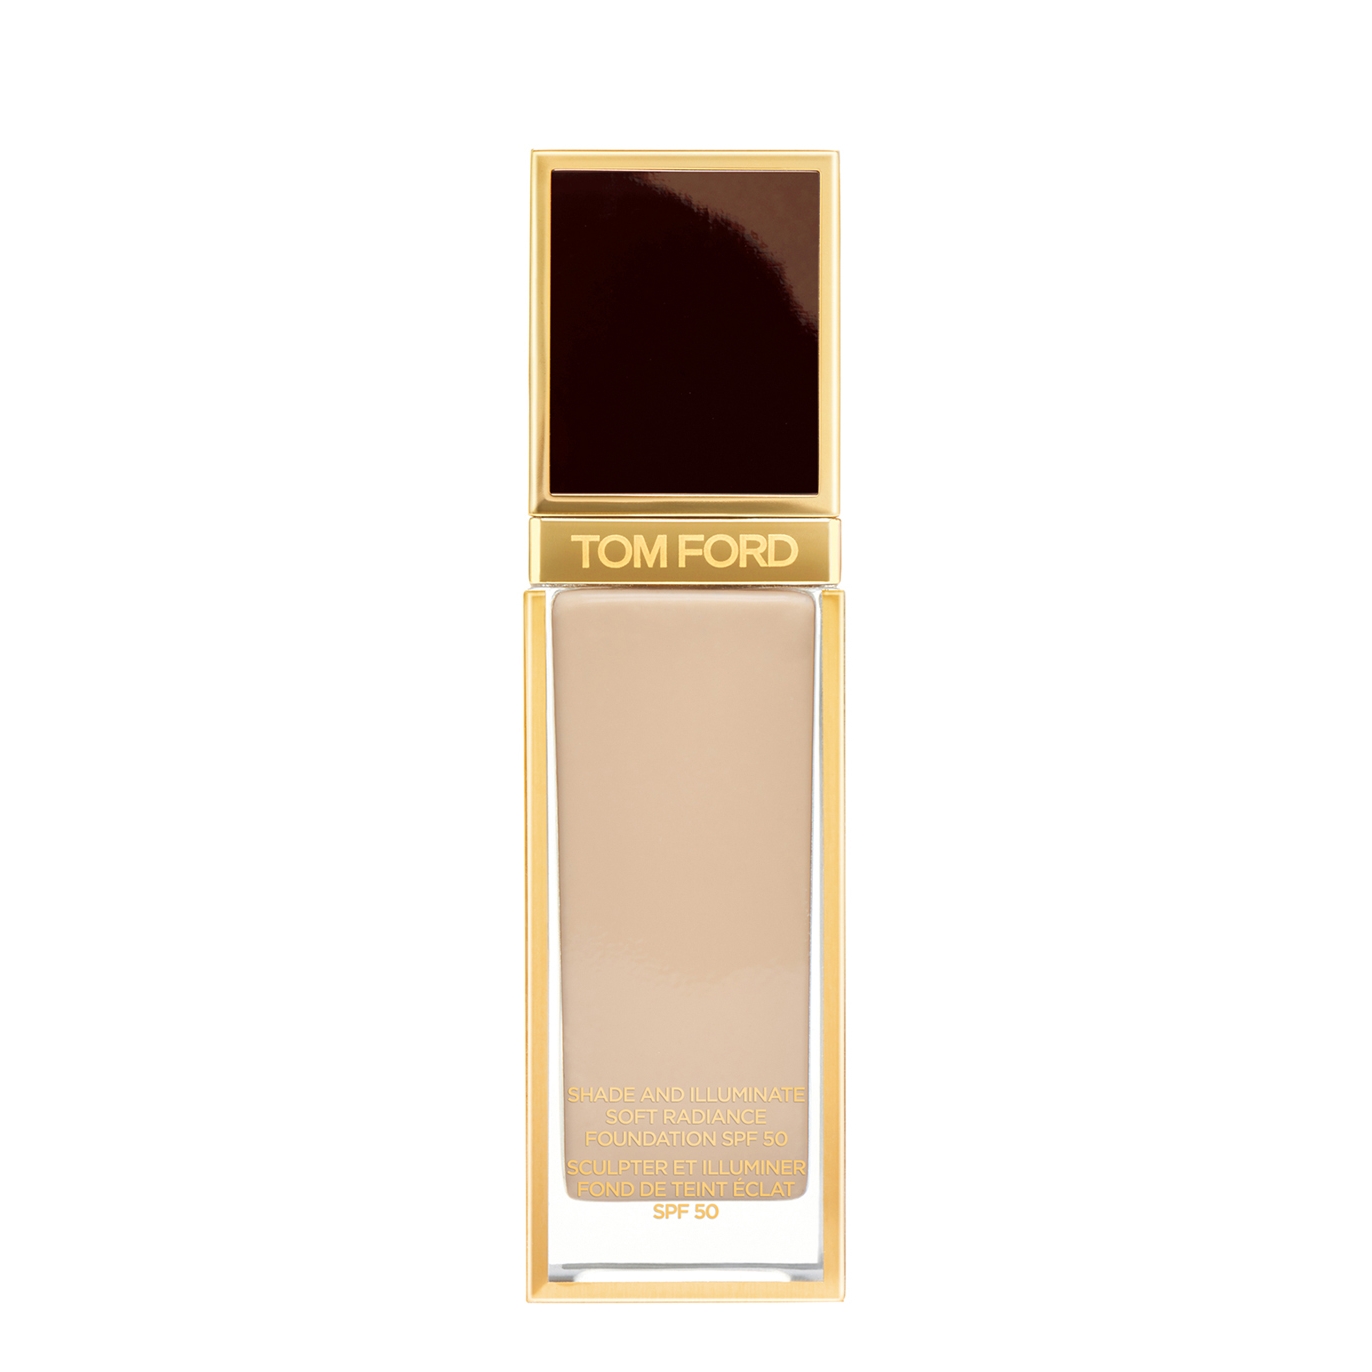 Tom Ford Shade And Illuminate Soft Radiance Foundation Spf 50, Fawn, Lightweight Formula, Seamless Coverage, In White